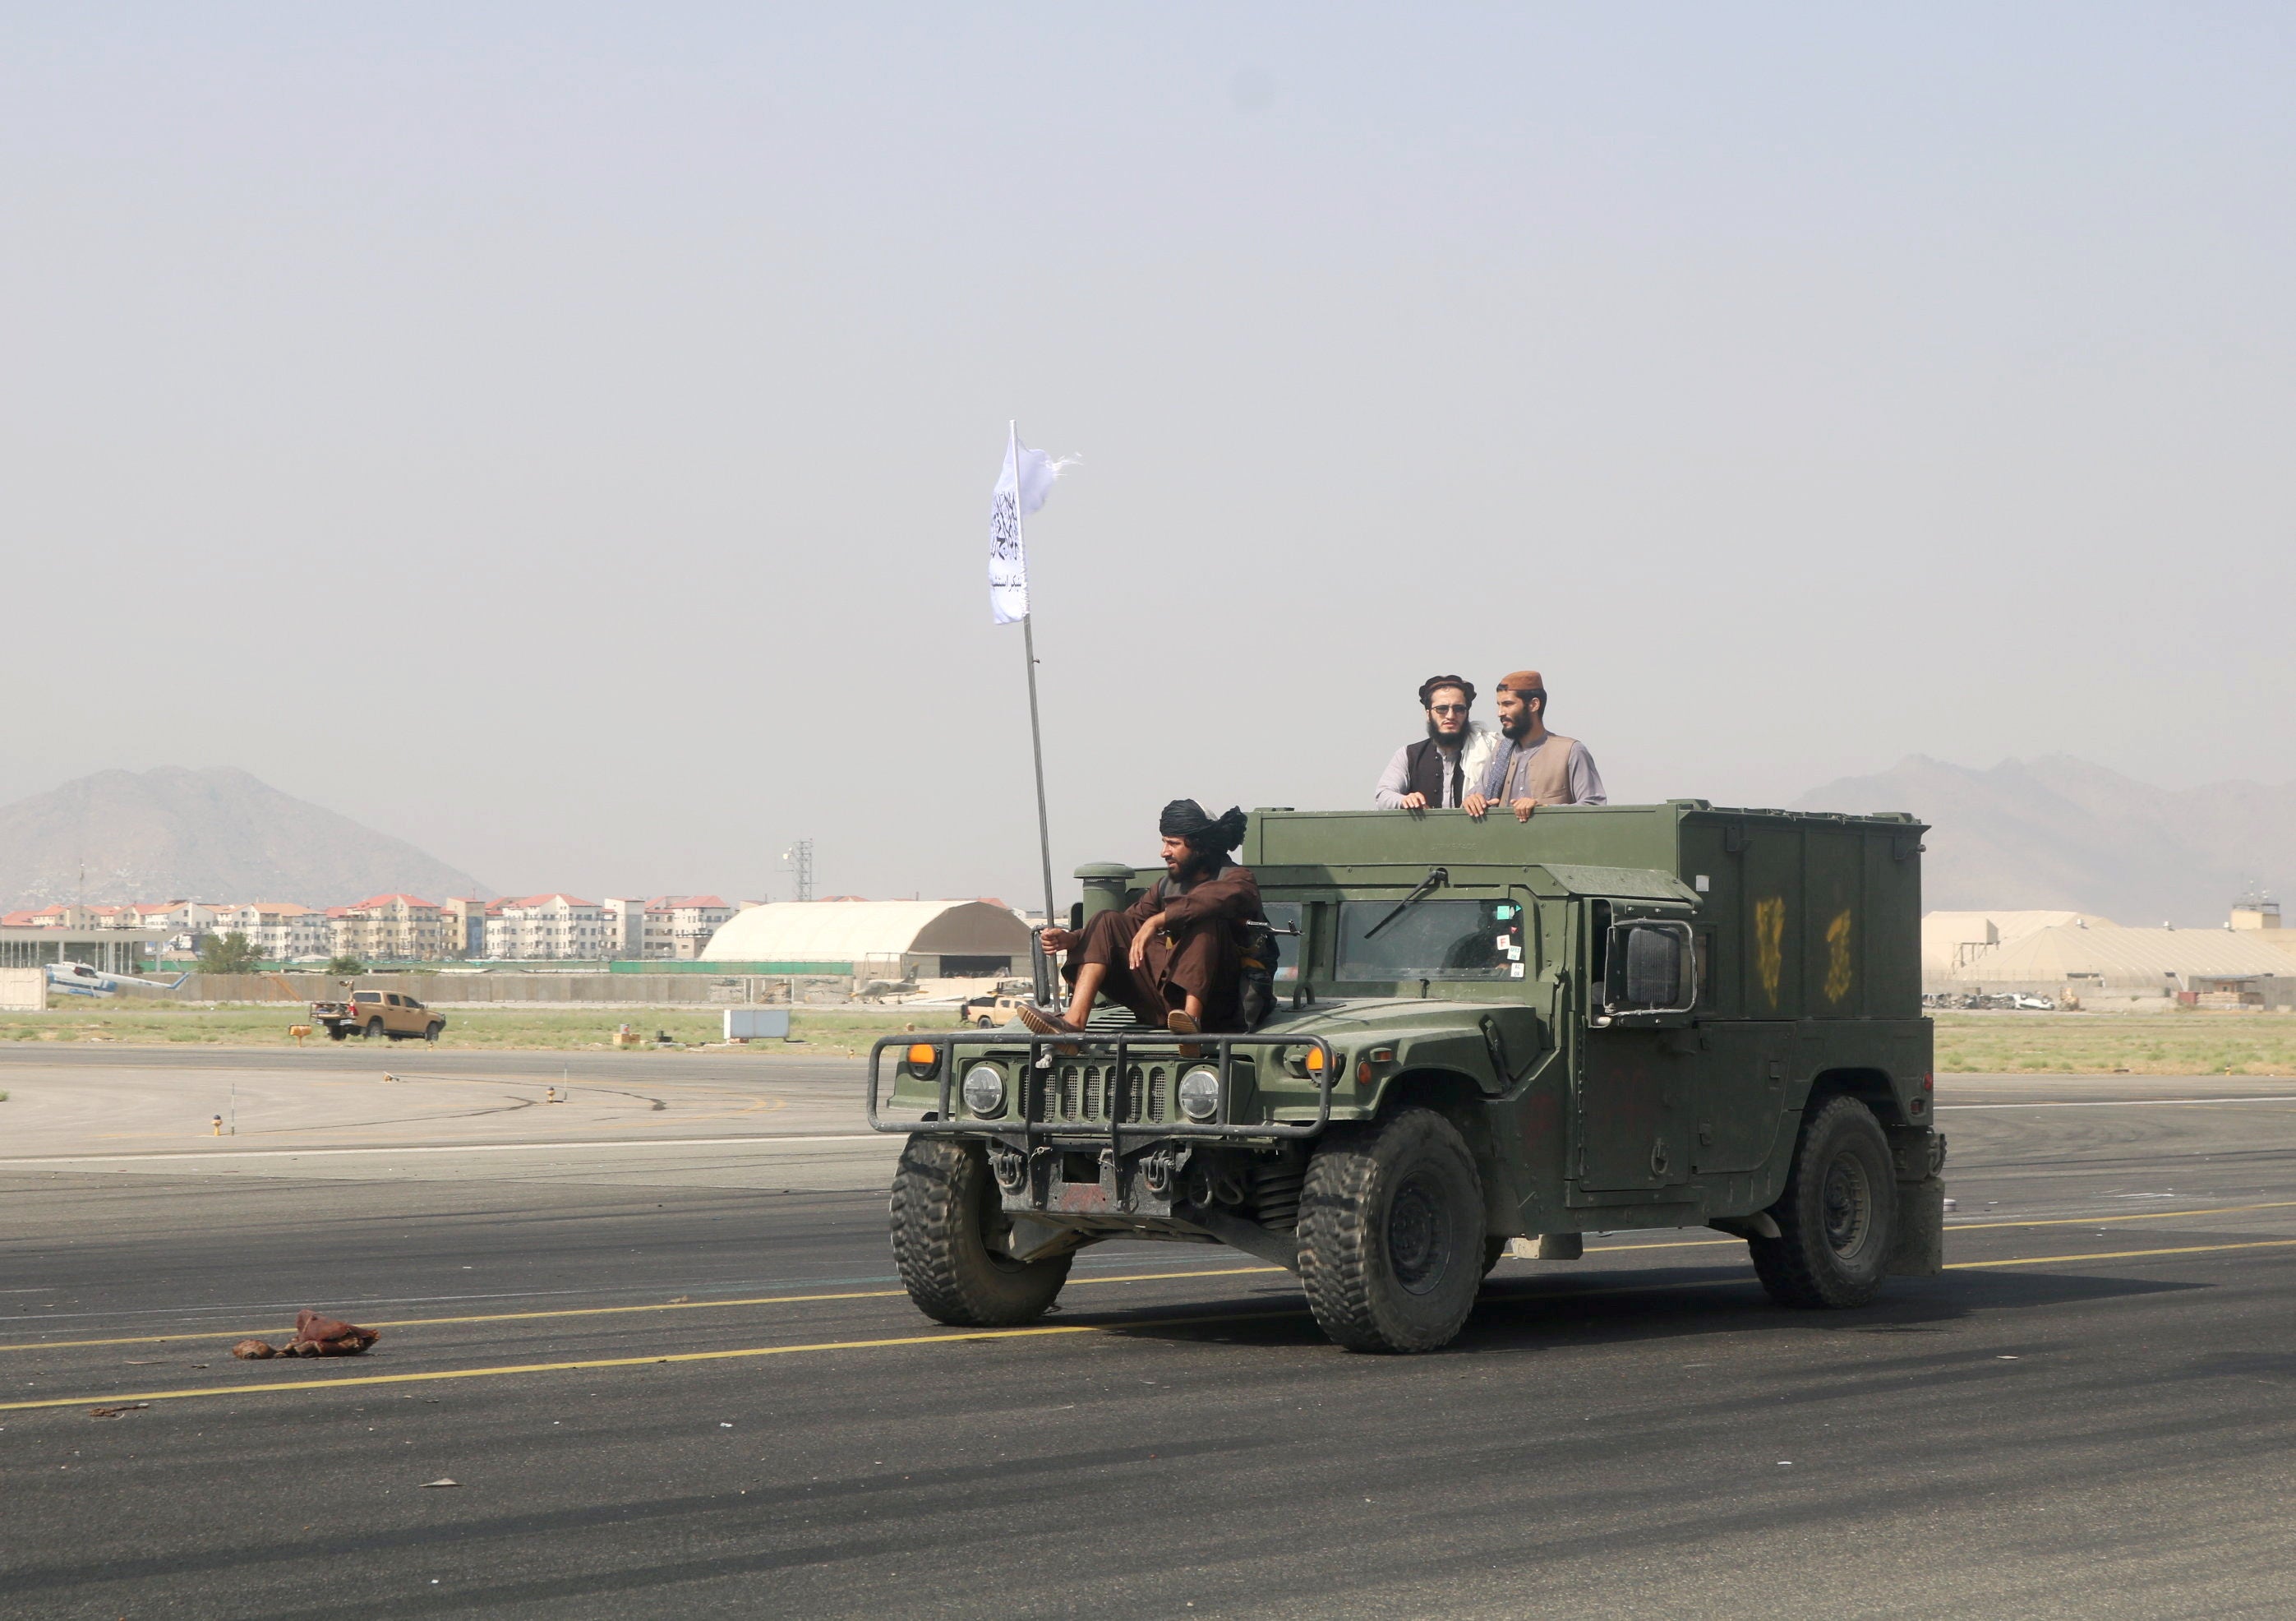 Taliban forces use an armoured vehicle to patrol along the runway at Kabul airport